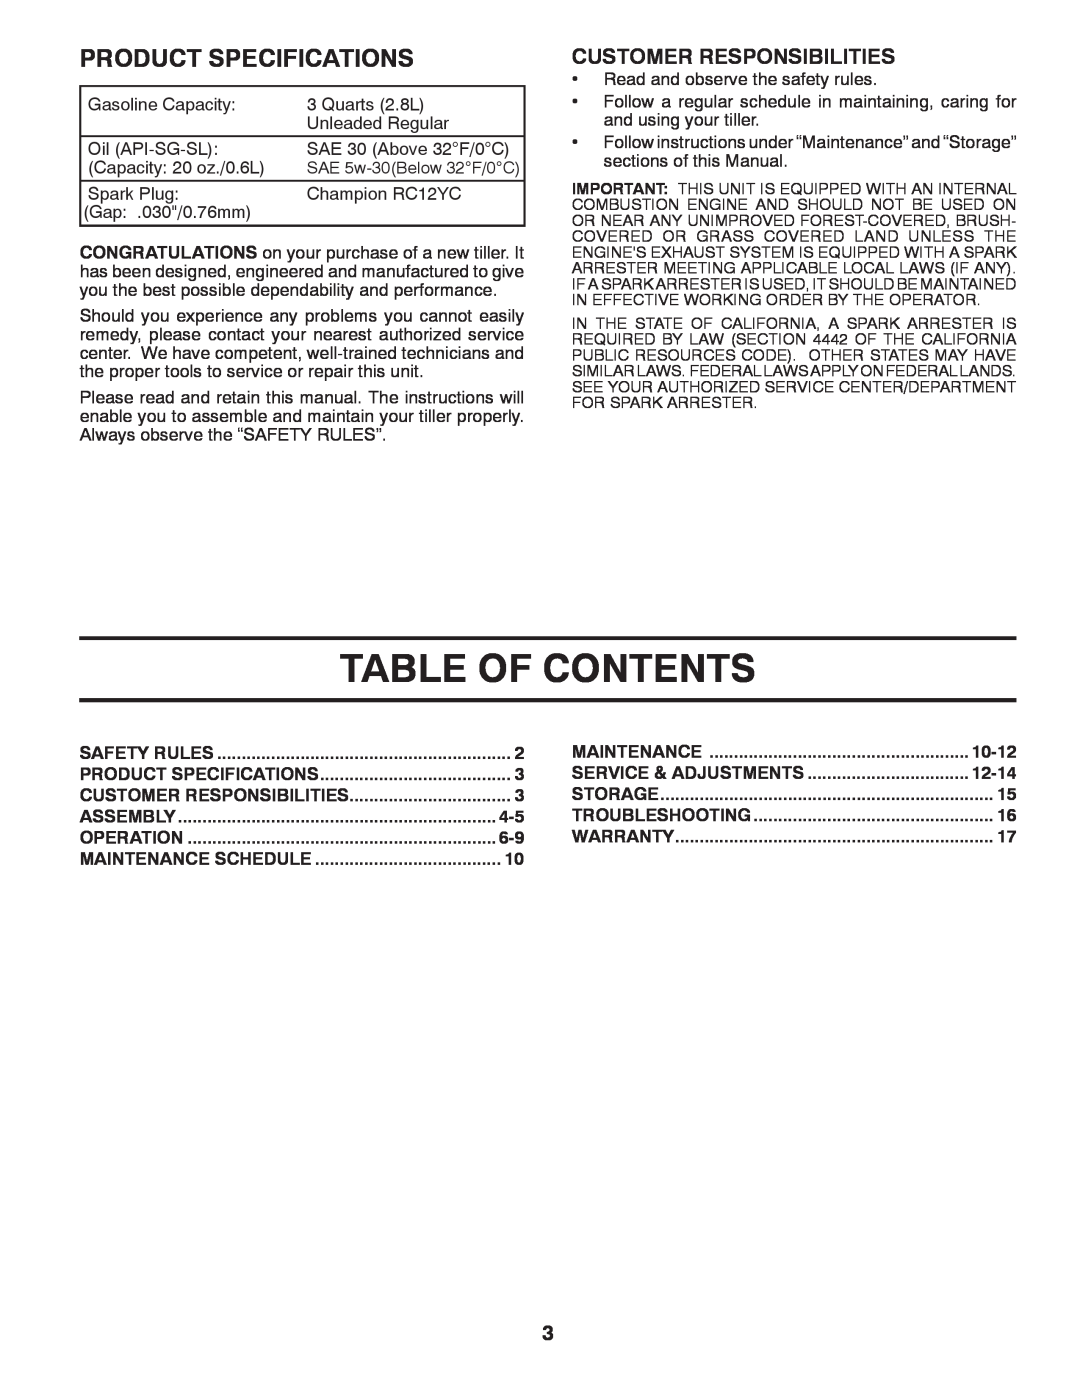 Poulan 413288 manual Table Of Contents, Product Specifications, Customer Responsibilities, 10-12, 12-14 